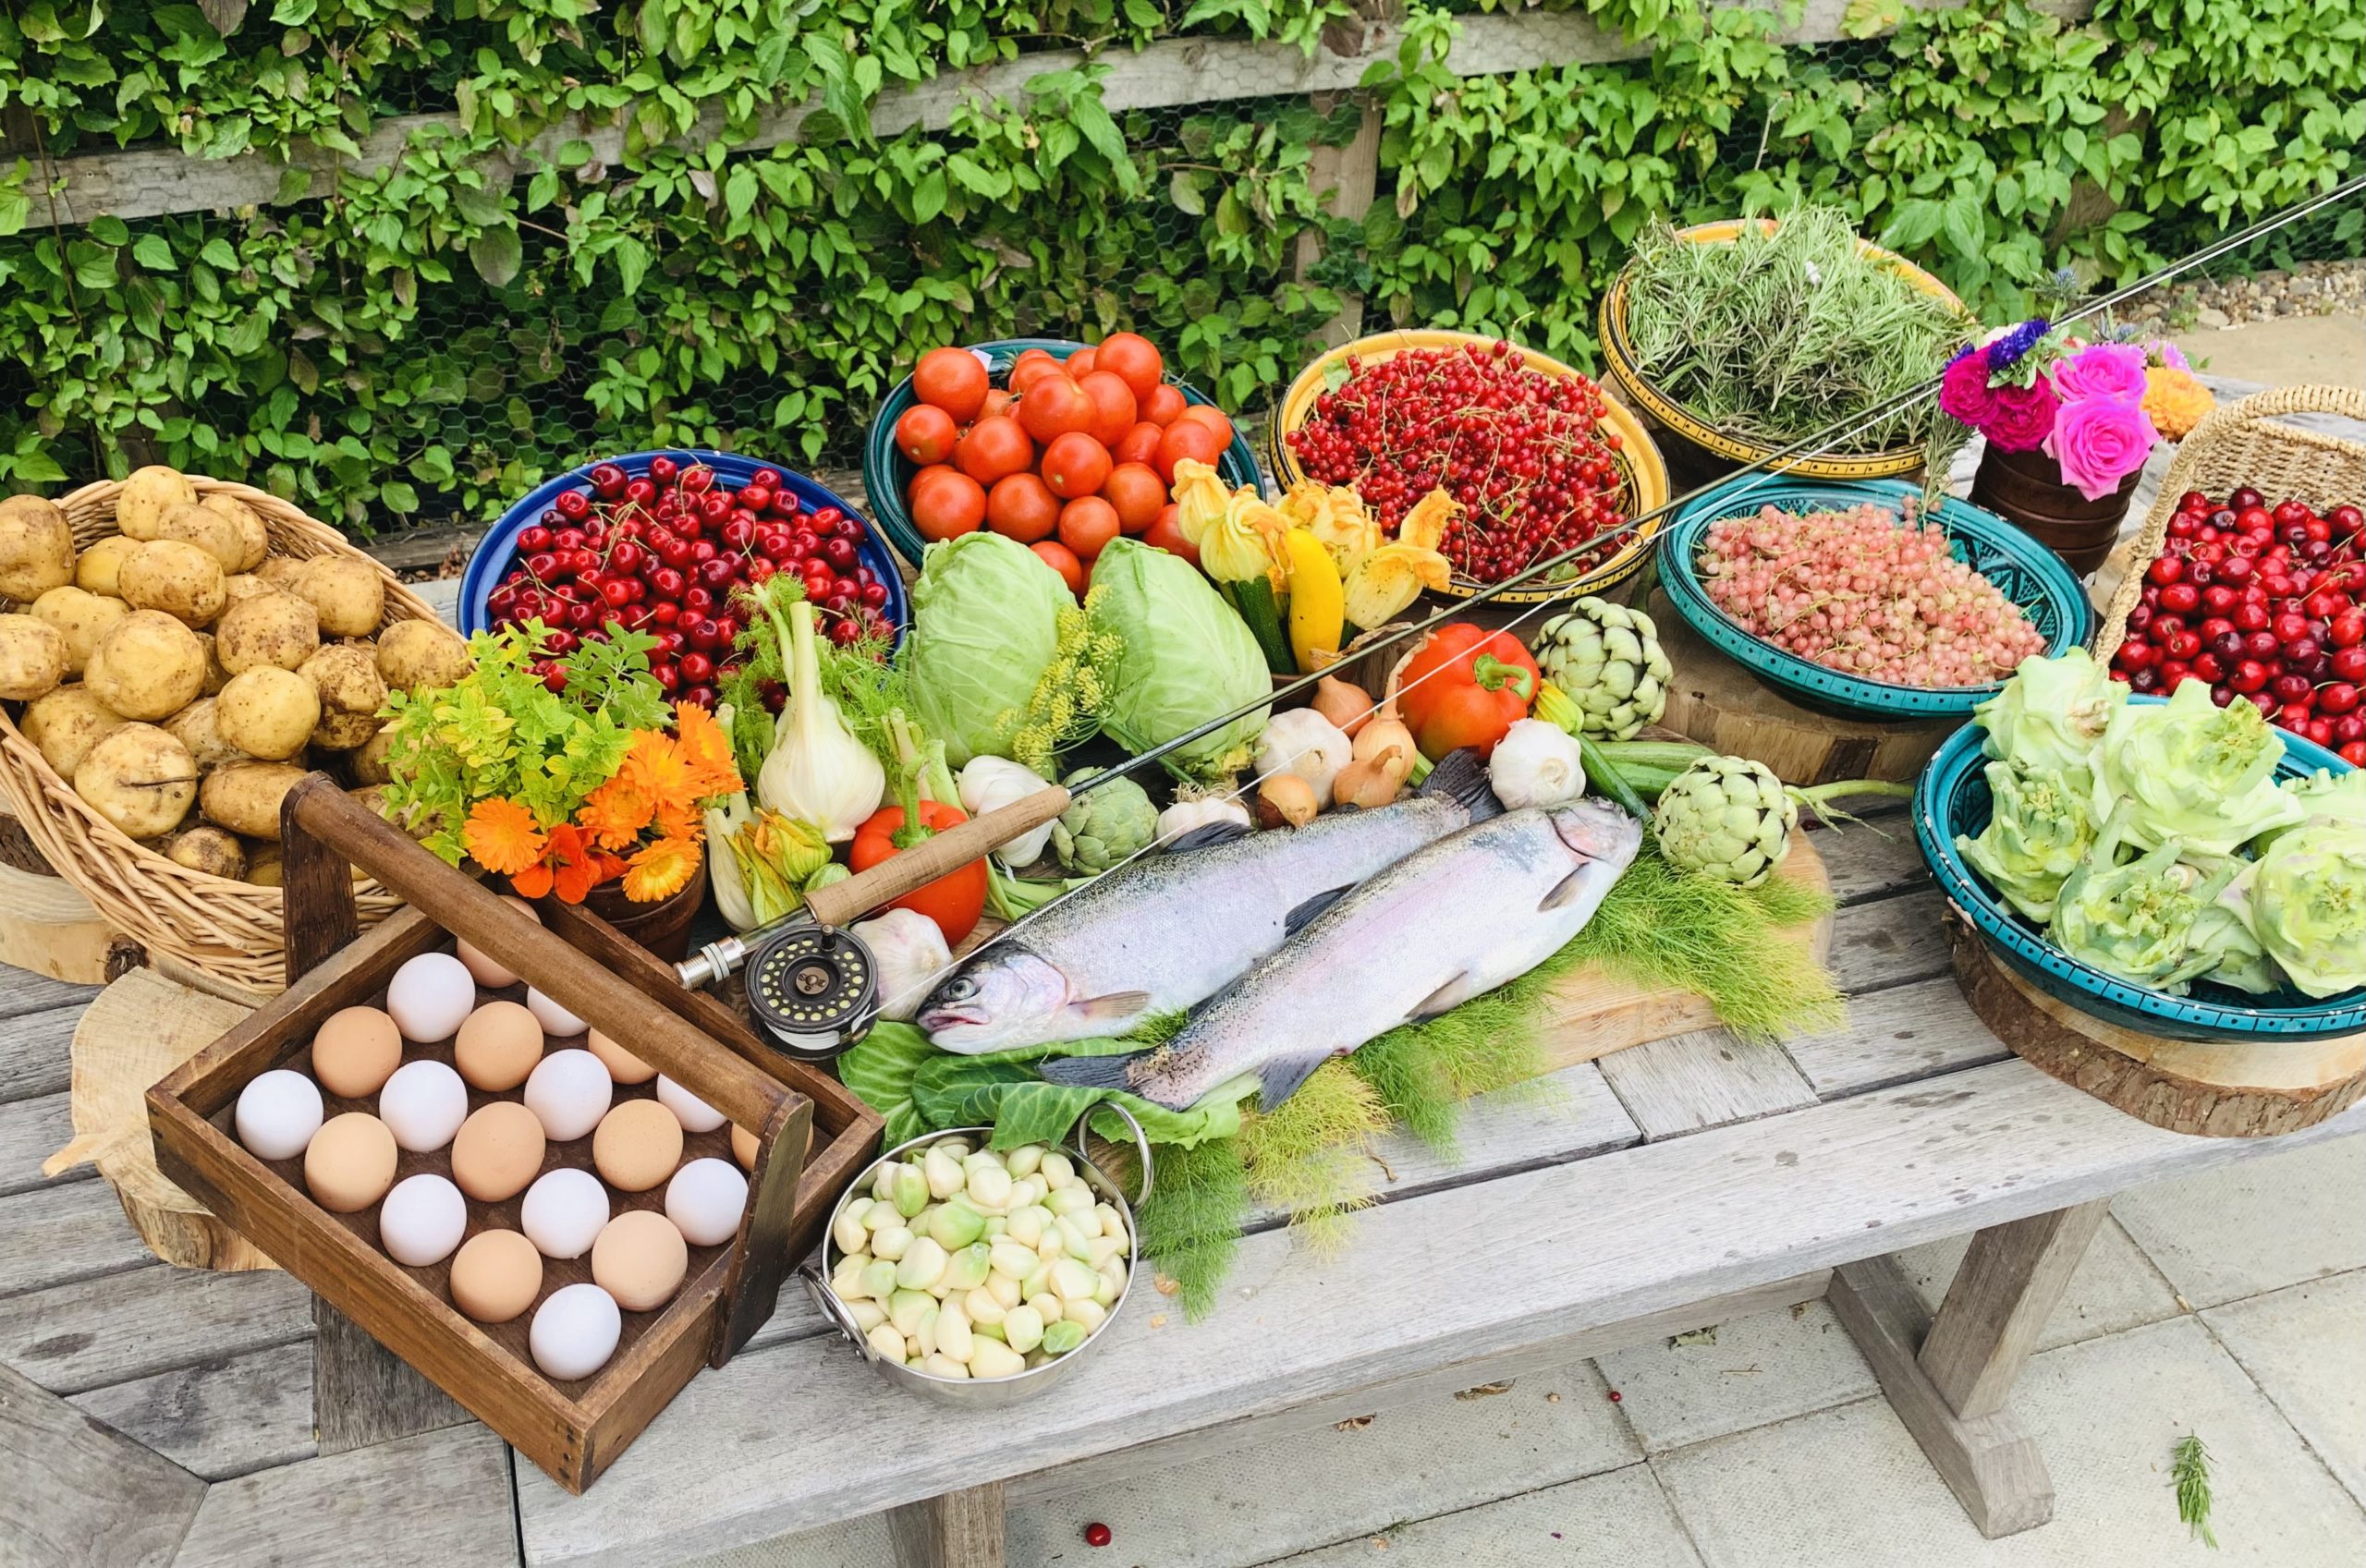 Colourful display of home Grown Fruit vegetables and herbs. free range eggs and hand caught trout